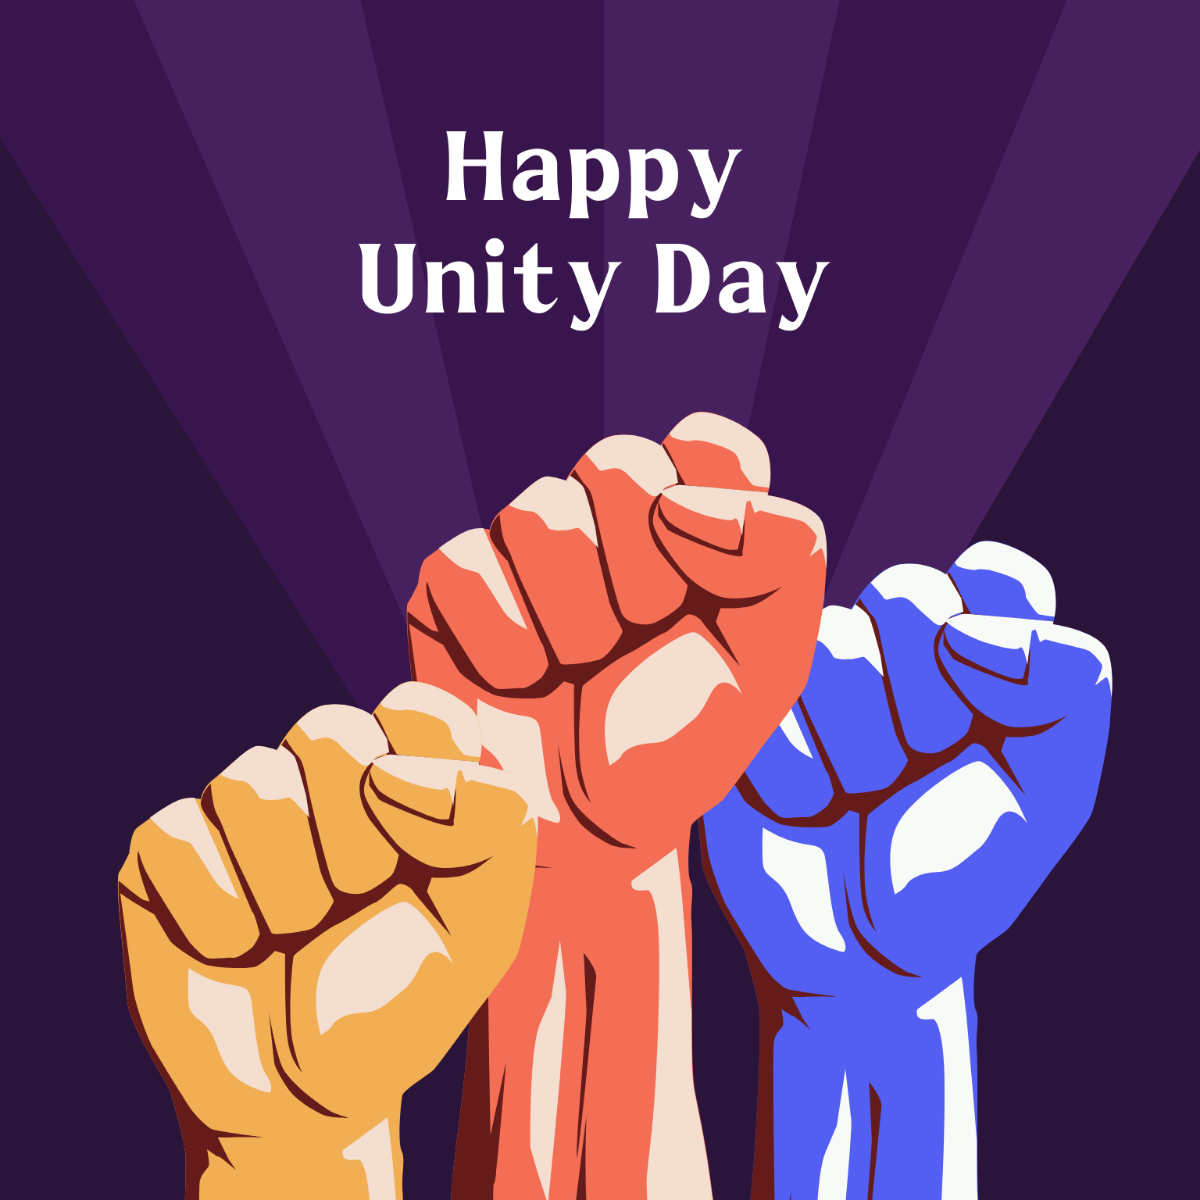 Happy Unity Day Illustration Template